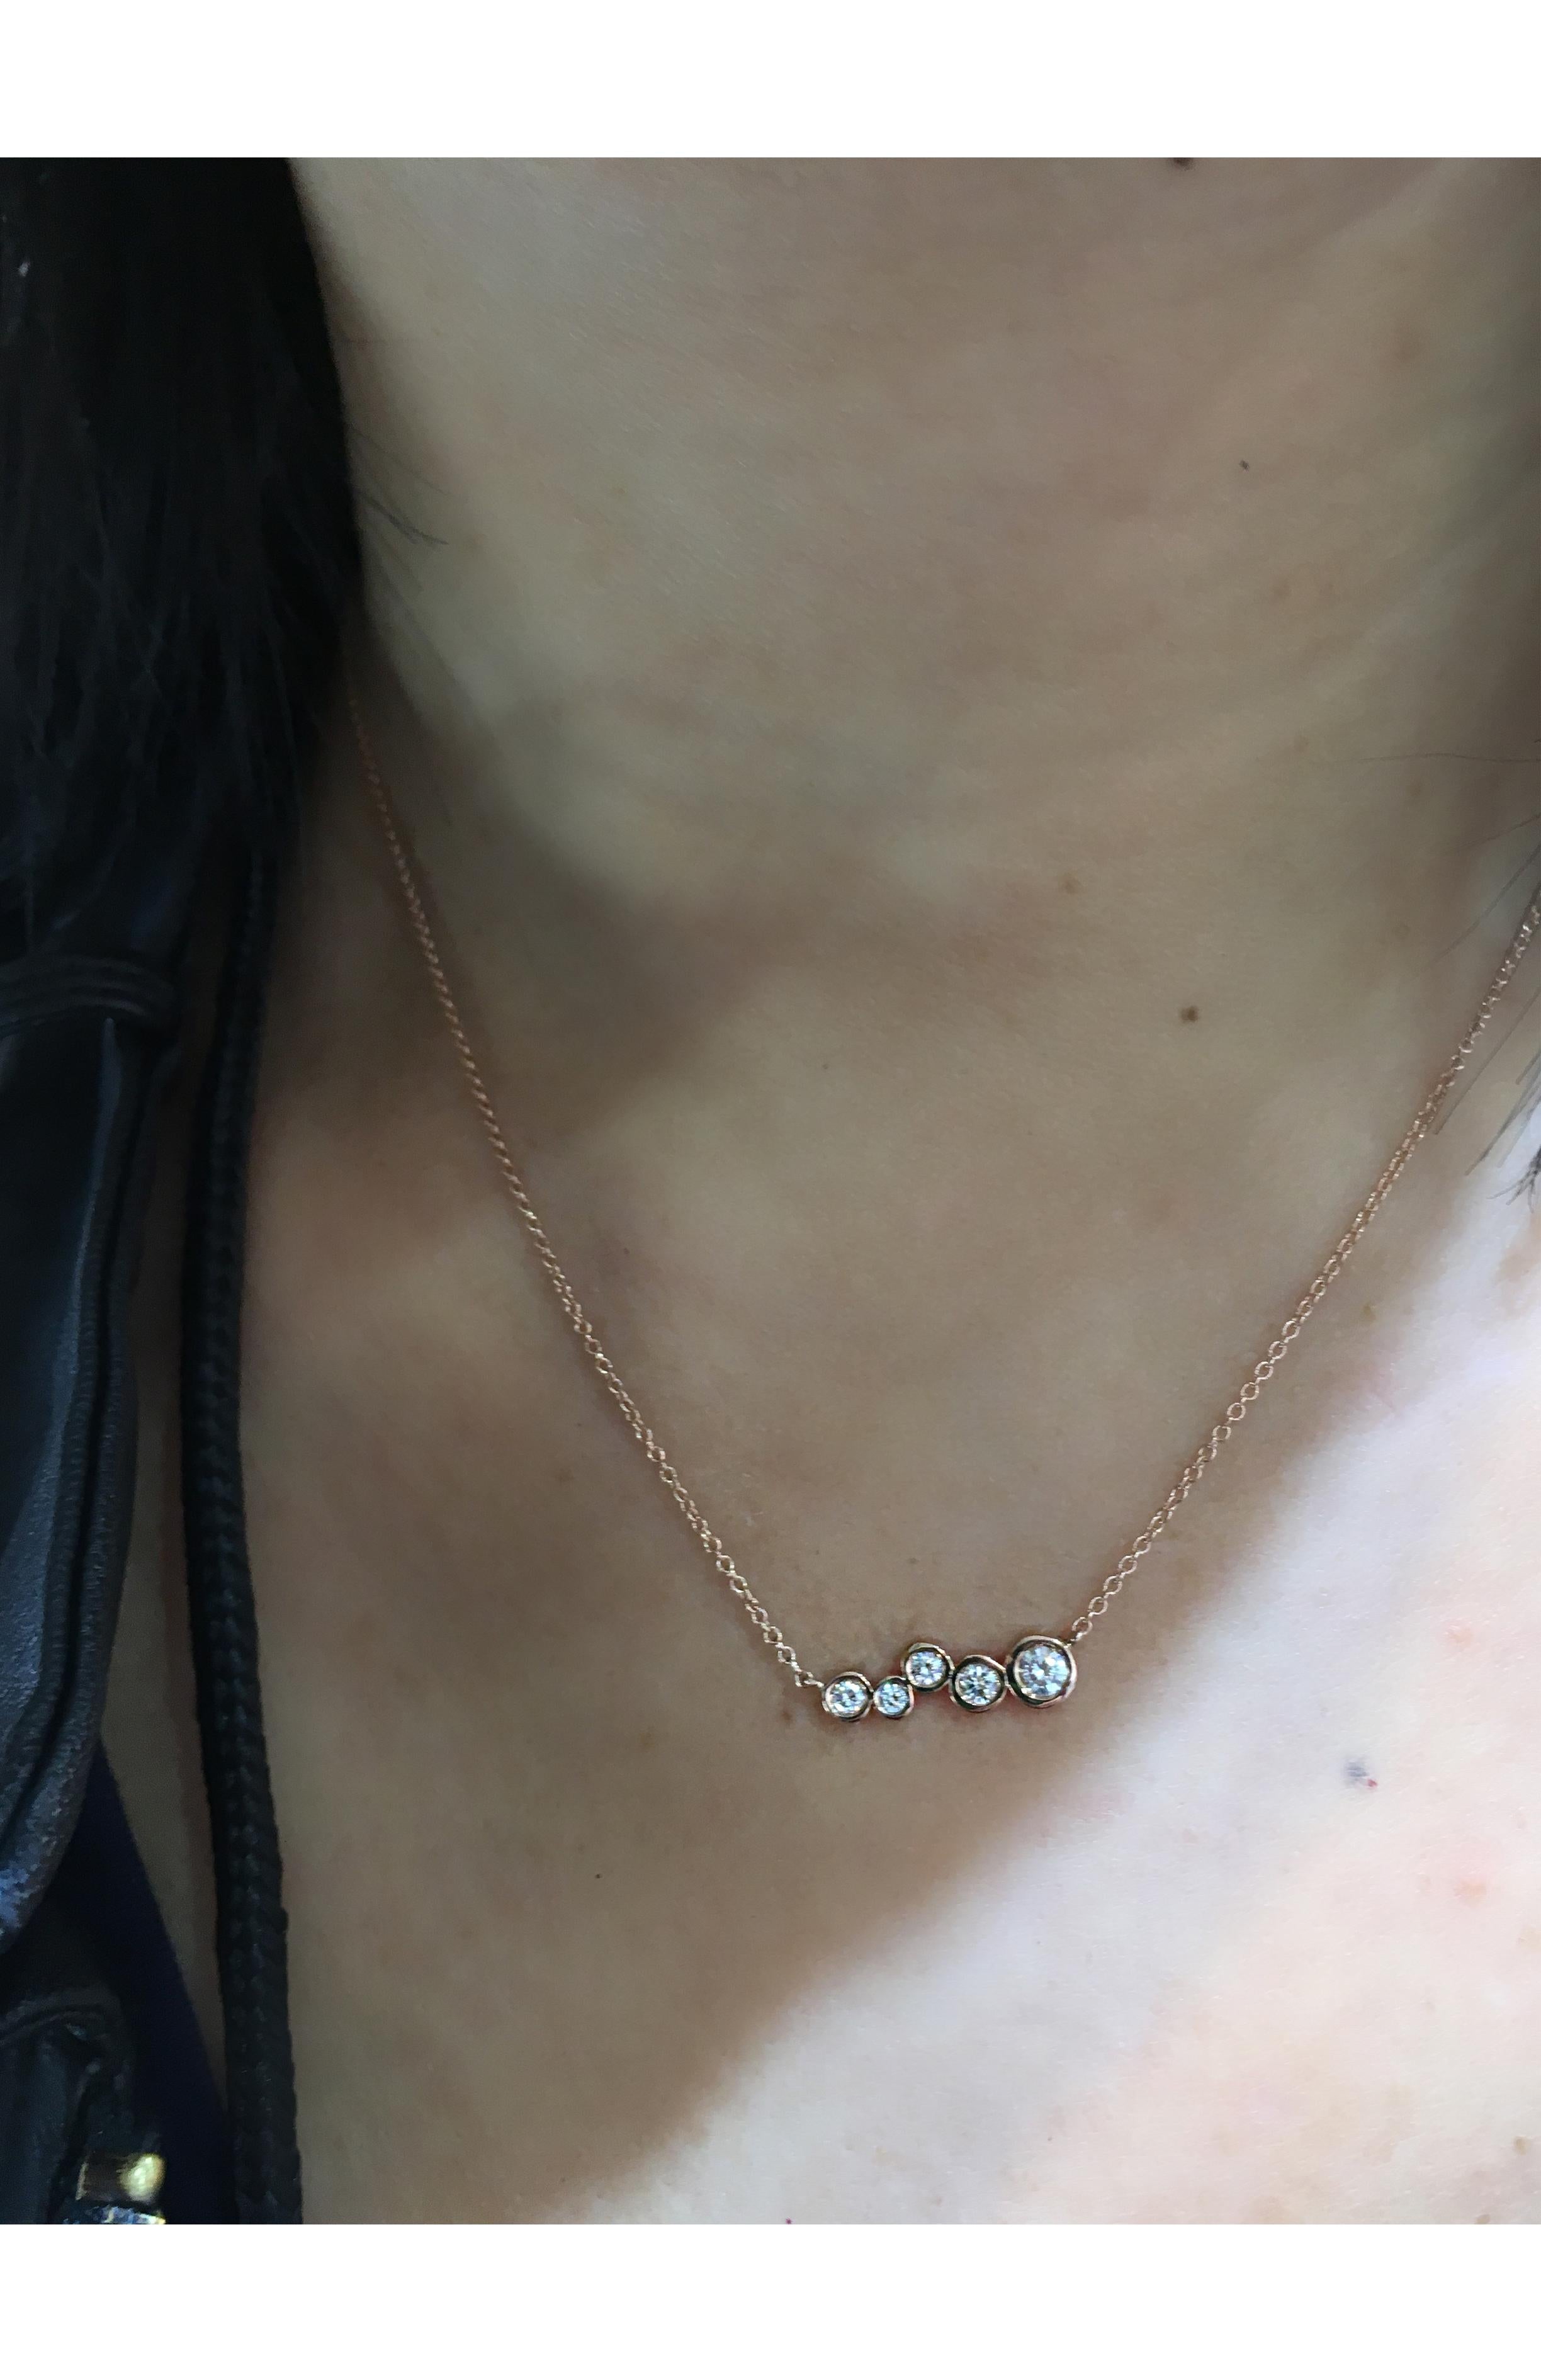 Our mini version of the classic bar pendant sprinkled with tapering sizes of diamonds.
Great for wearing on it's own or layering with your favorite necklaces! 

White Diamond Stones 0.27 cwt

Inspired by seeing the cross-section view of life, as if